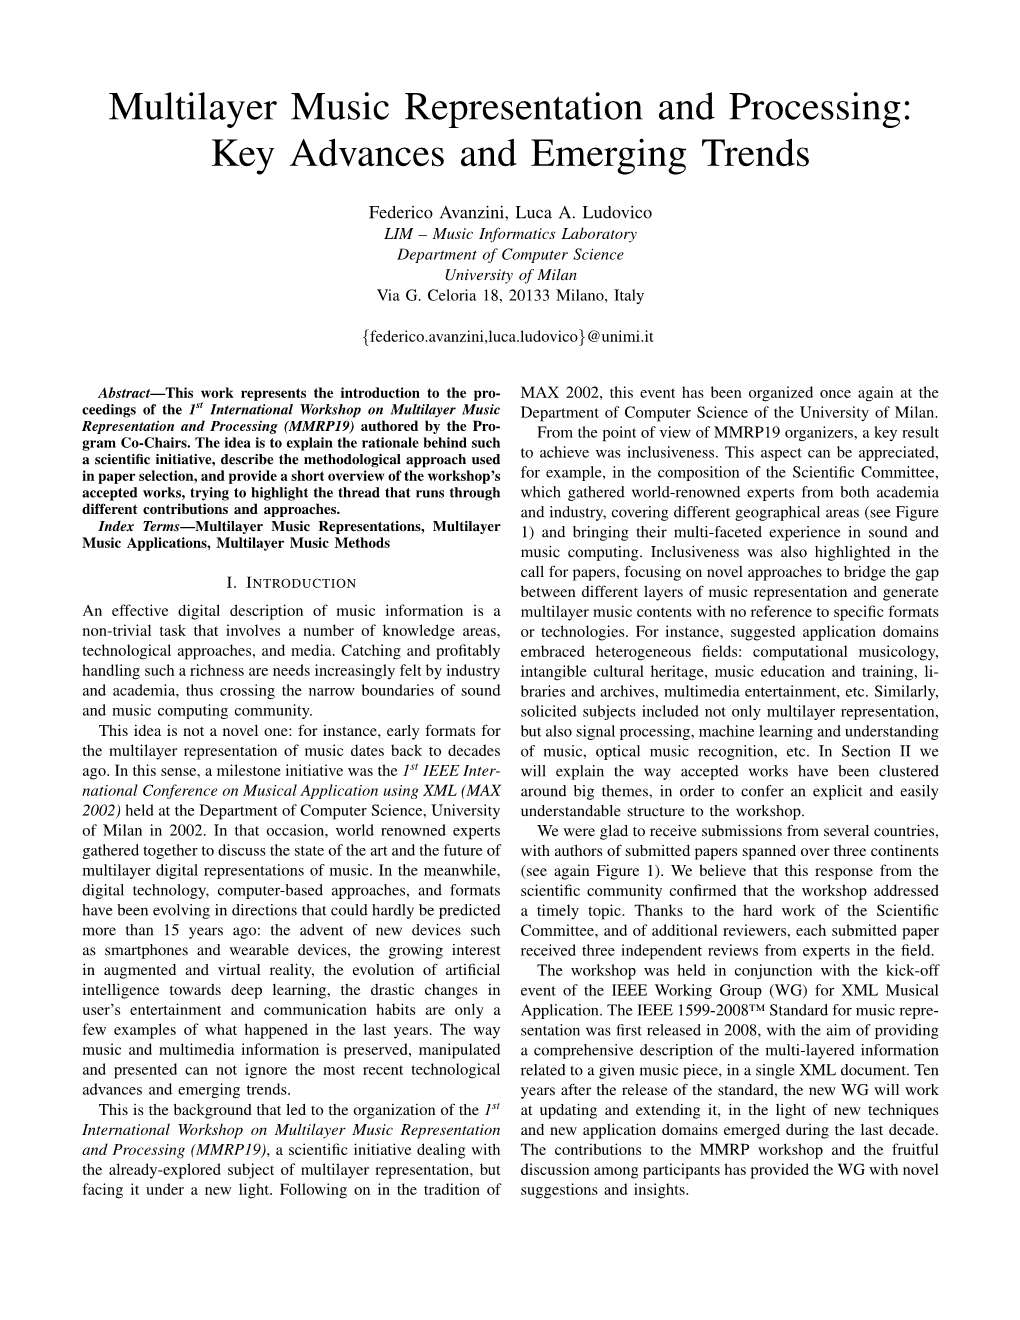 Multilayer Music Representation and Processing: Key Advances and Emerging Trends